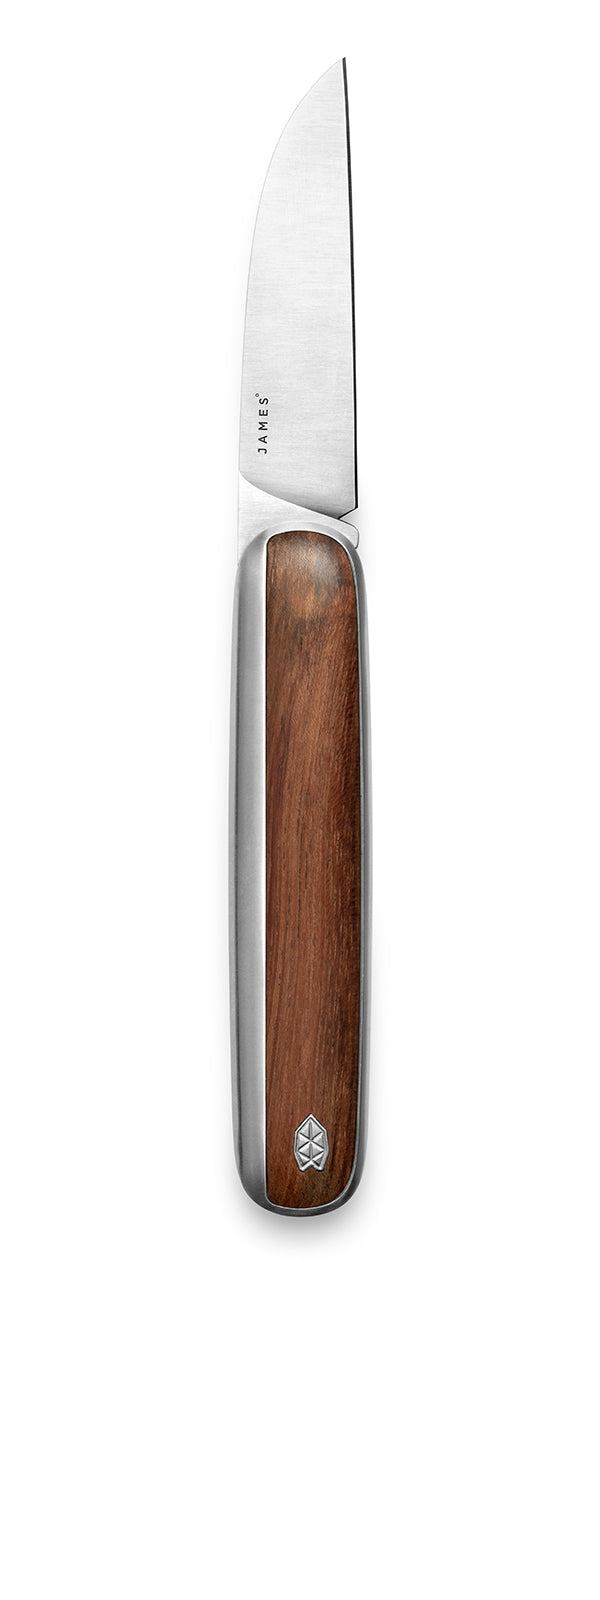 The Pike knife, fully opened with the blade visible.